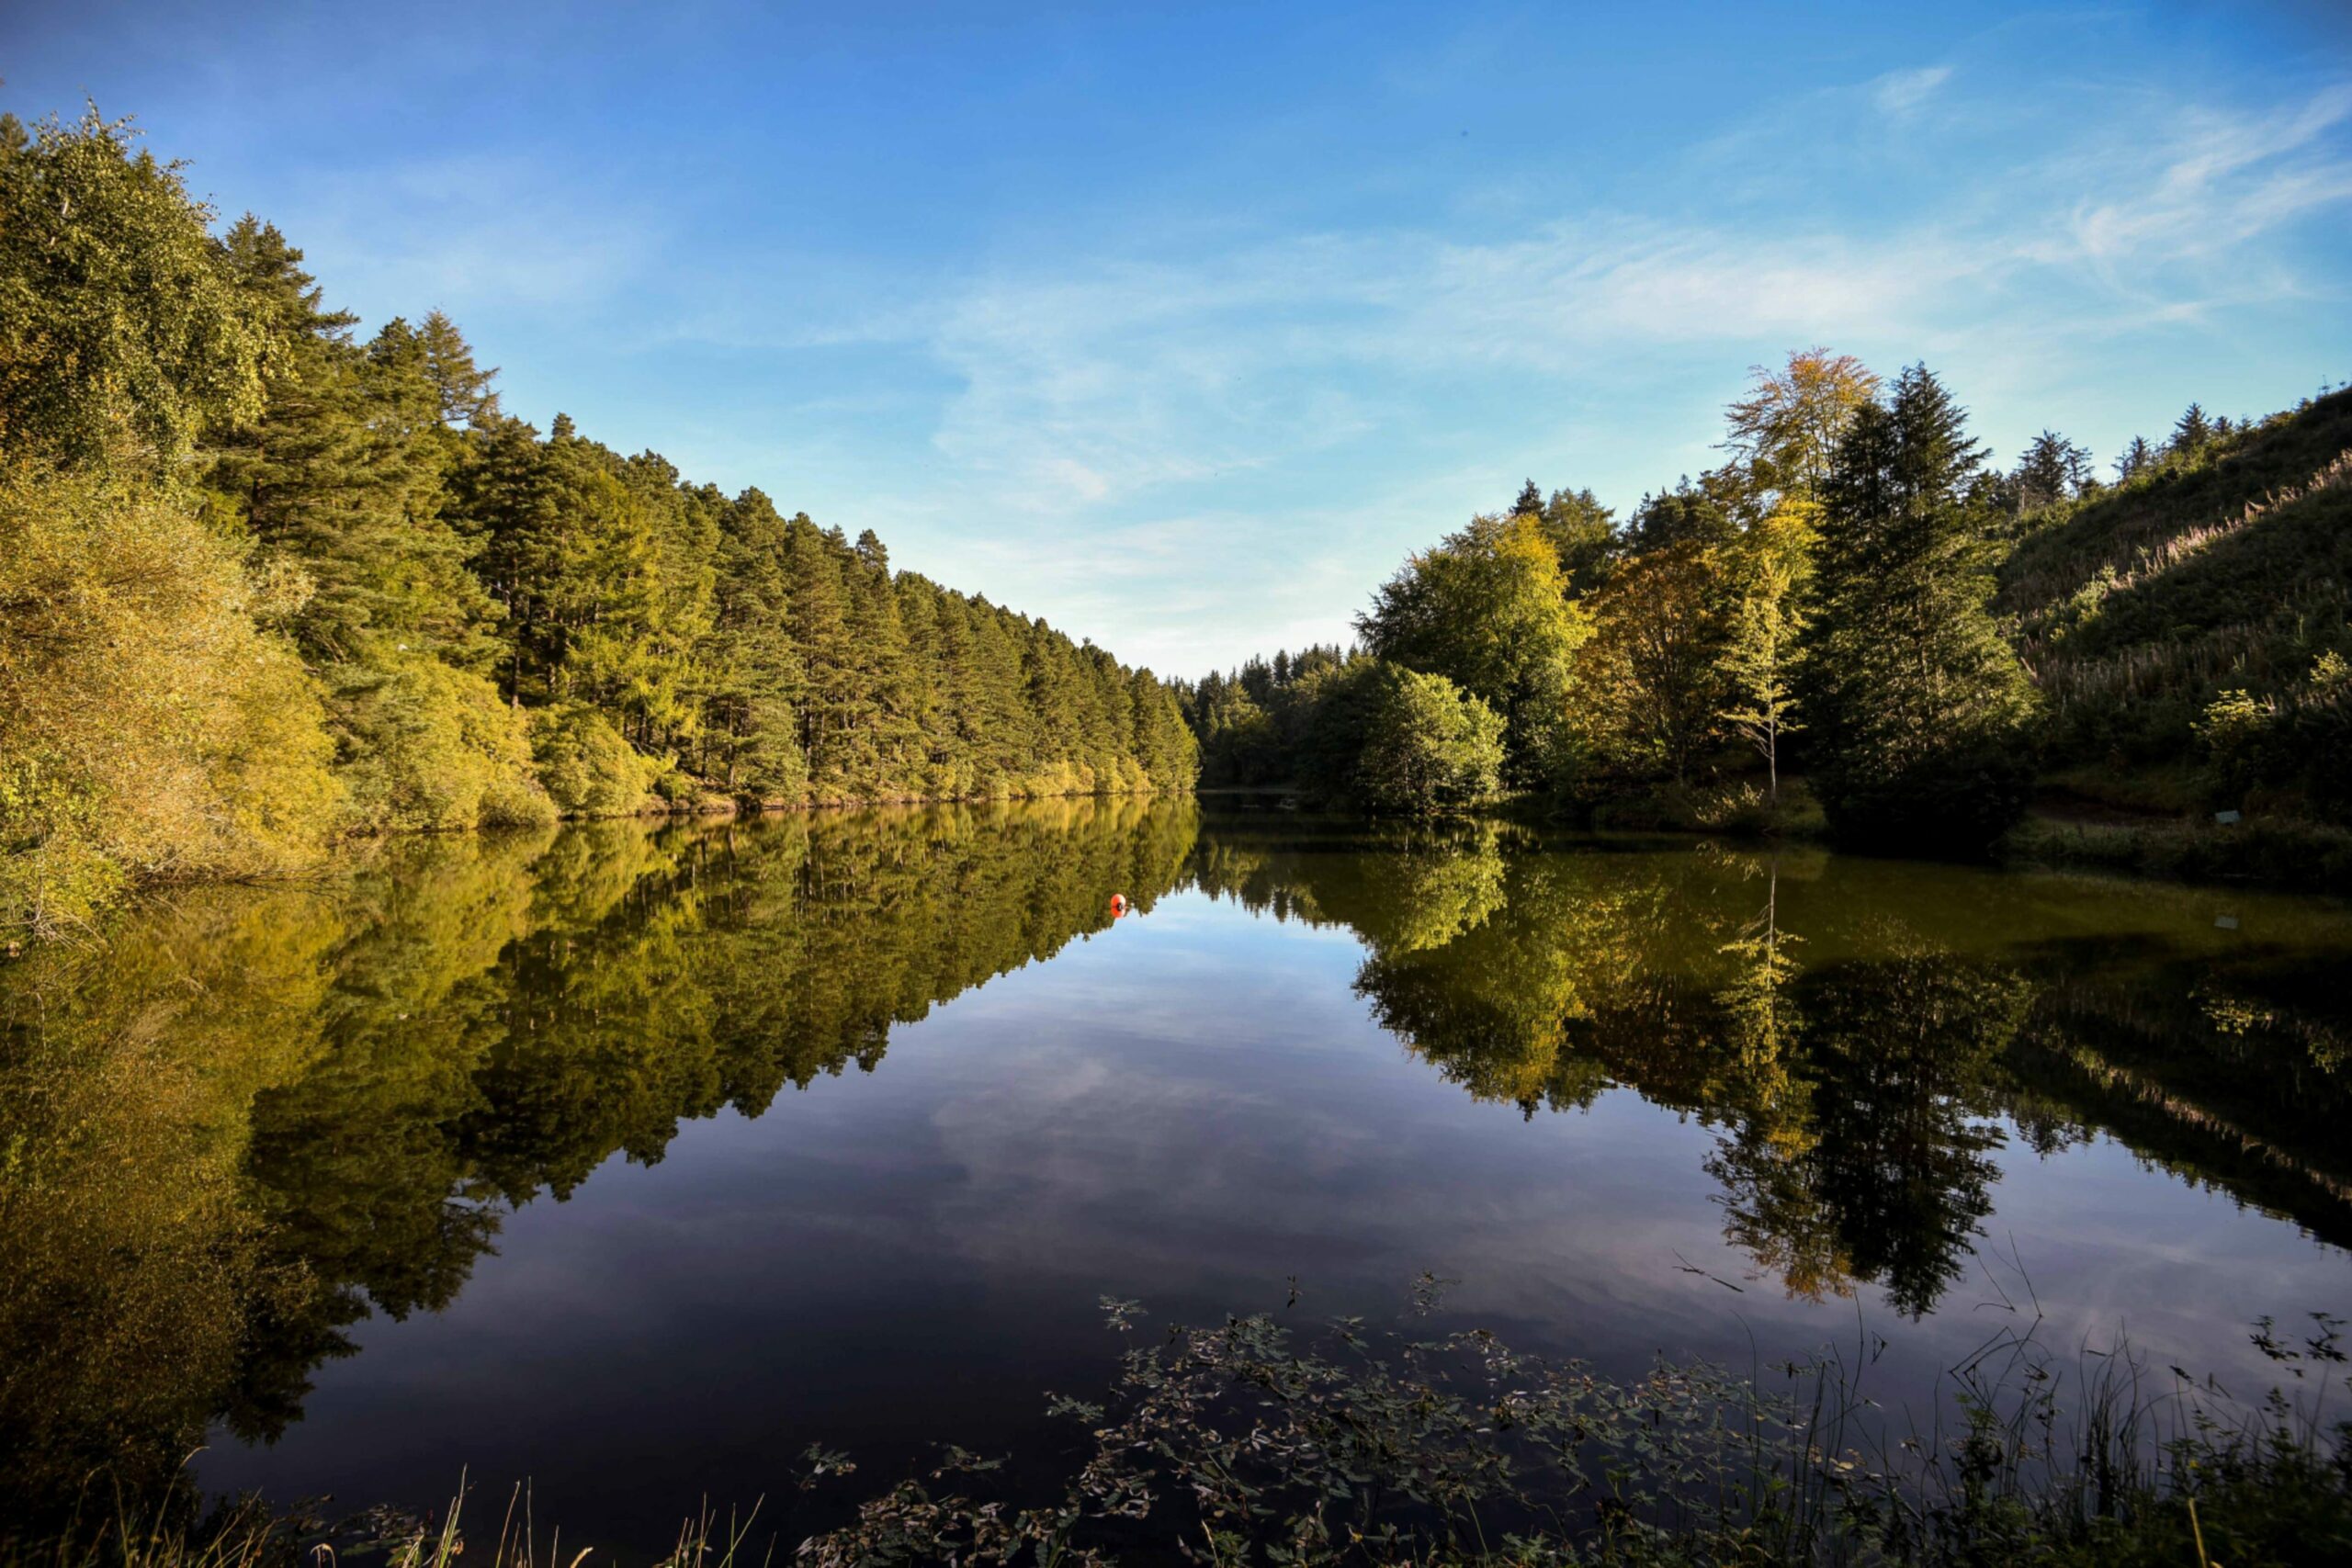 Trees are reflected in the loch at Millbuies Country Park near Elgin, Moray.